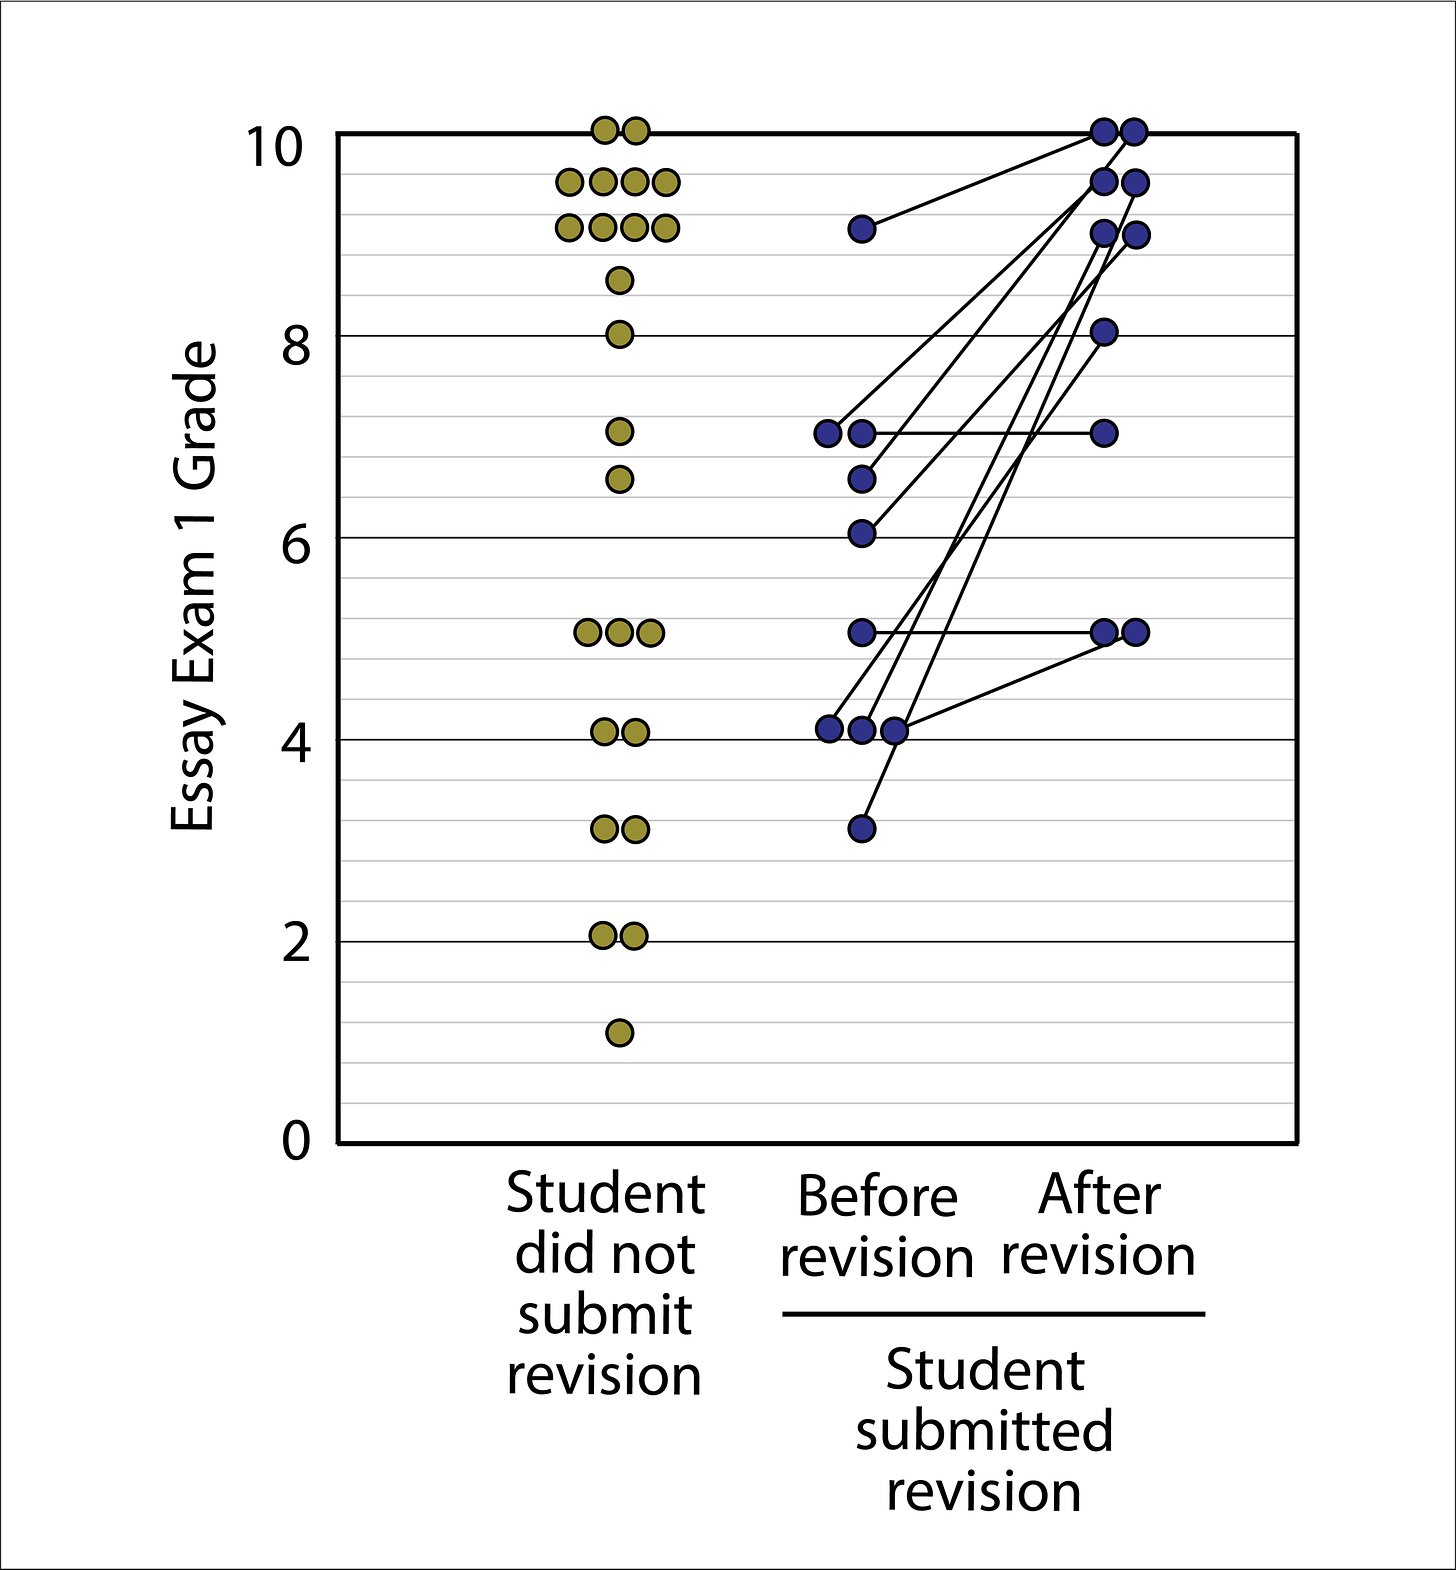 dot plot showing the grades (from 0-10) of students who submitted a revision, and grades of students who did submit a revision (before and after revision)